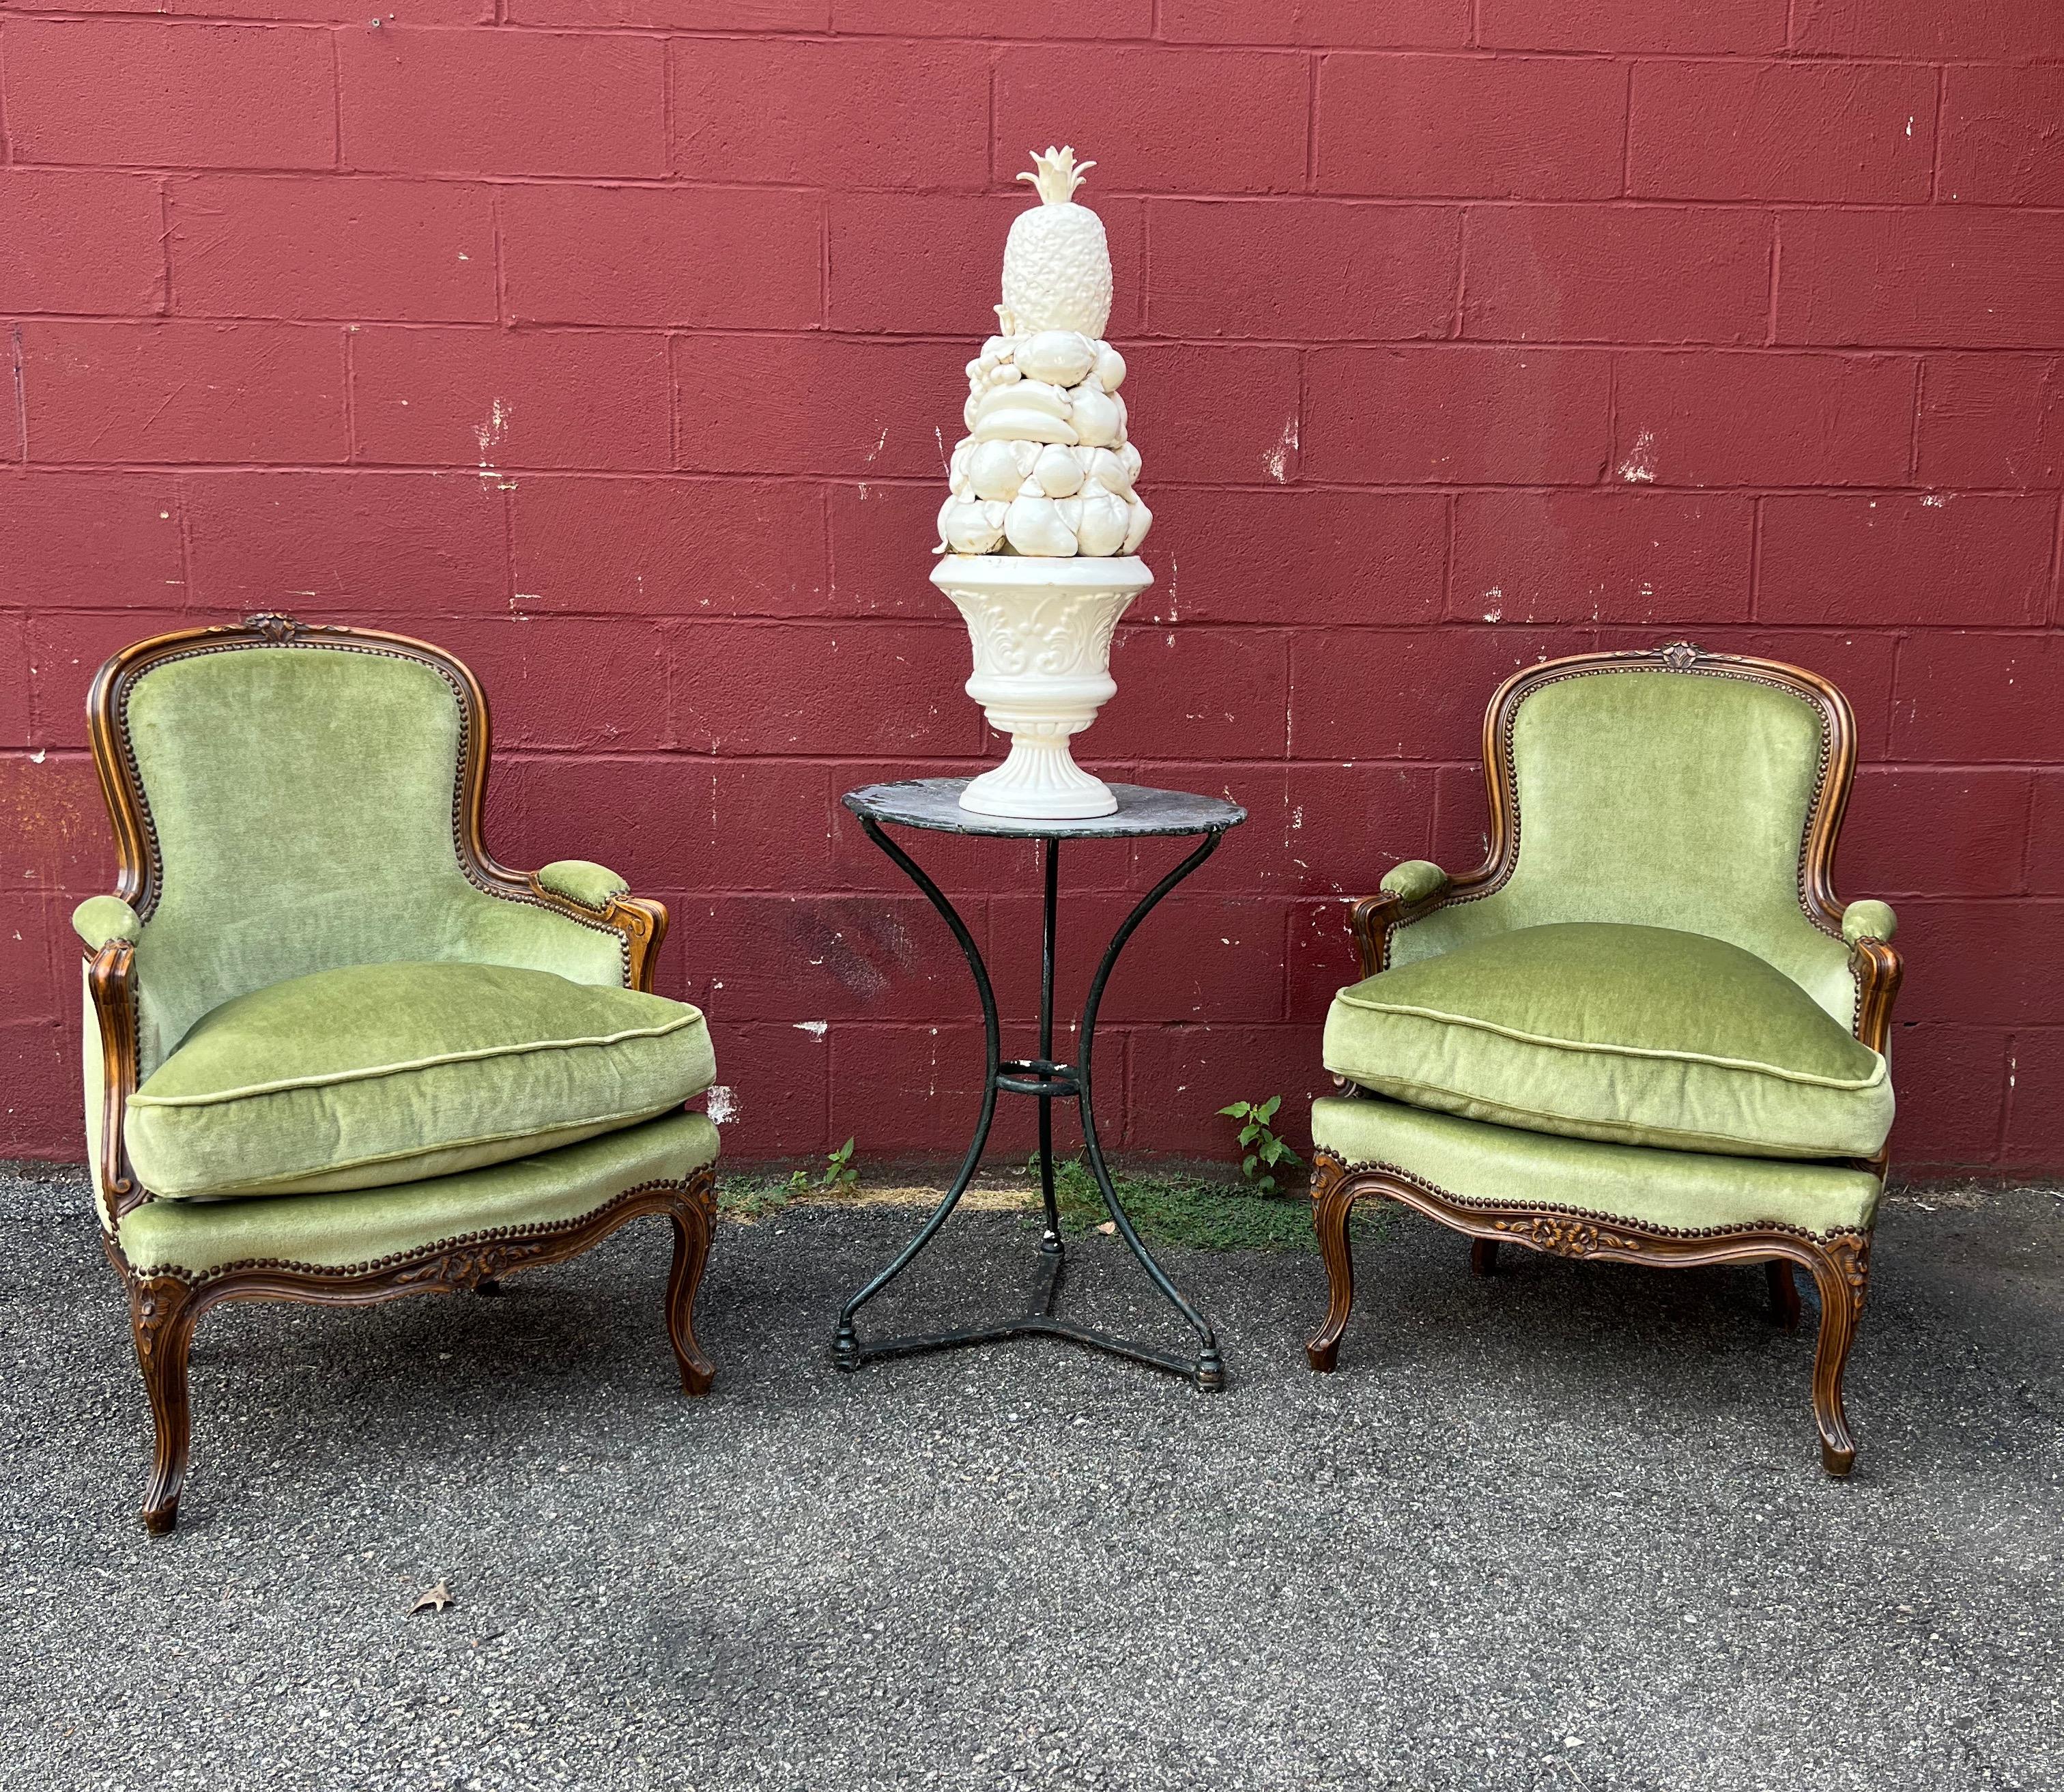 A classic pair of French Louis XV style armchairs upholstered in a rich medium green velvet. The fruitwood frames have hand carved floral motifs and graceful curved legs. Very good vintage condition.
French, circa 1920s.

Dimensions: 34” Back